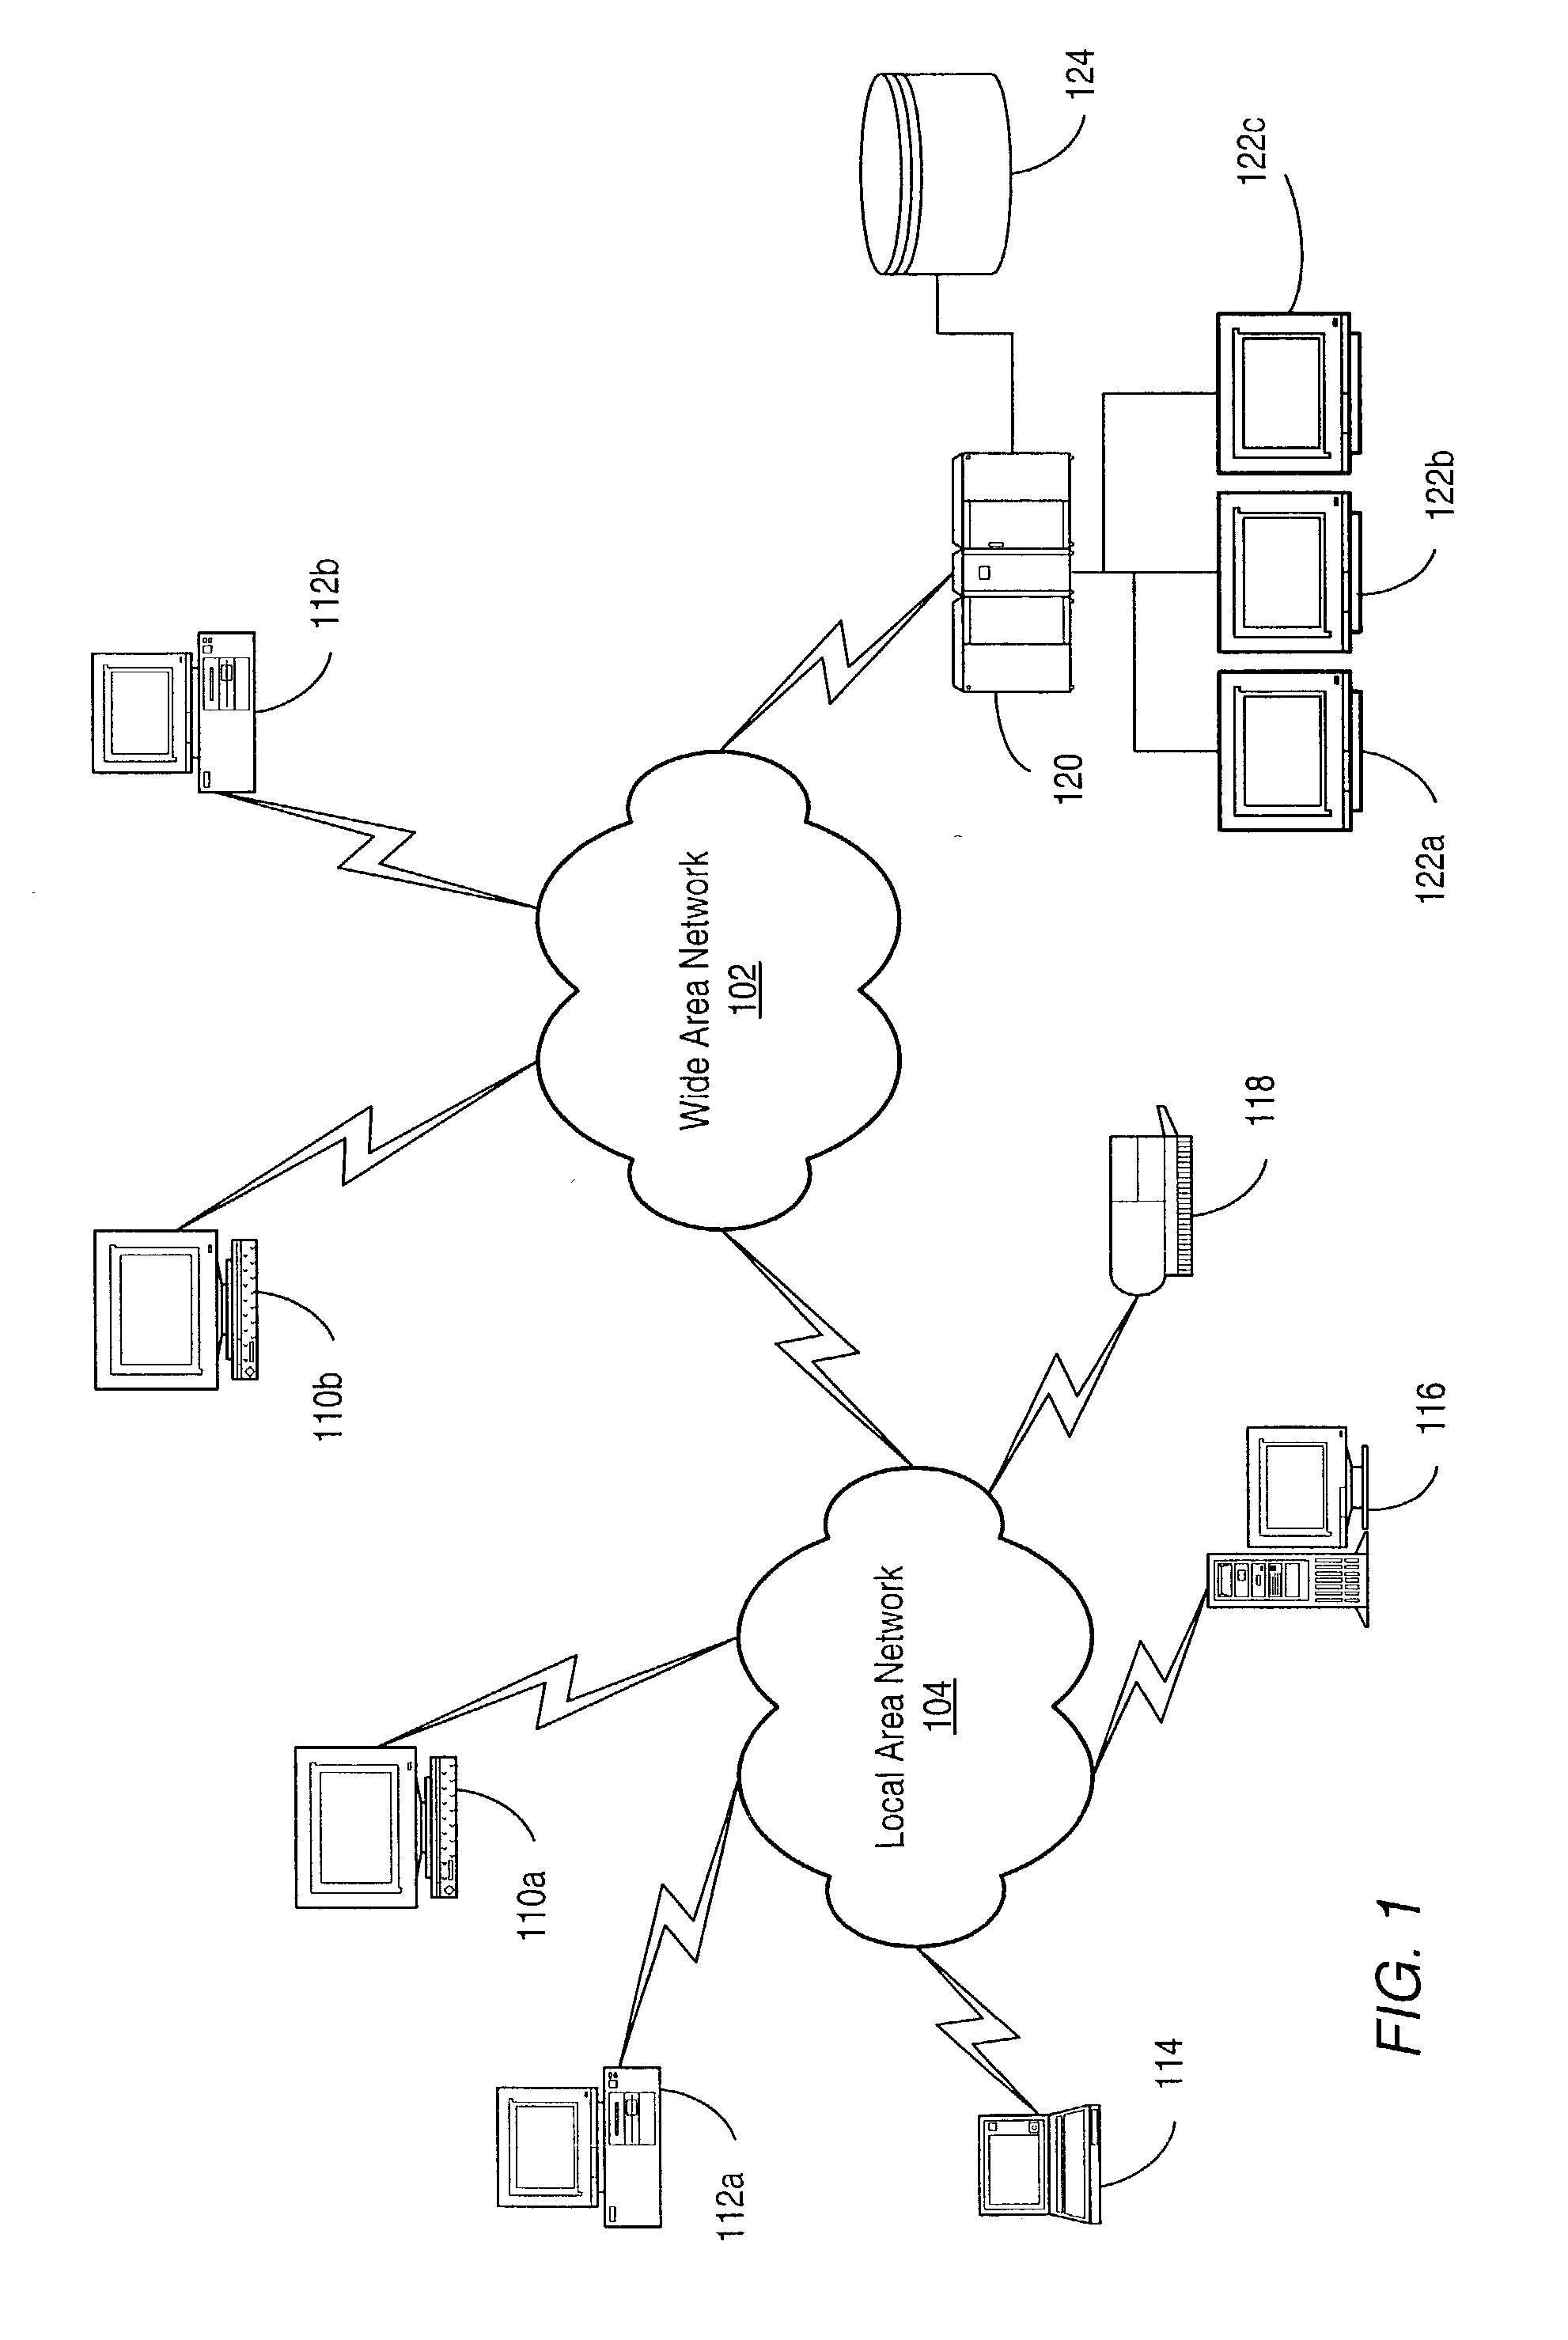 Computerized method and system for determining causation in premises liability for an accident